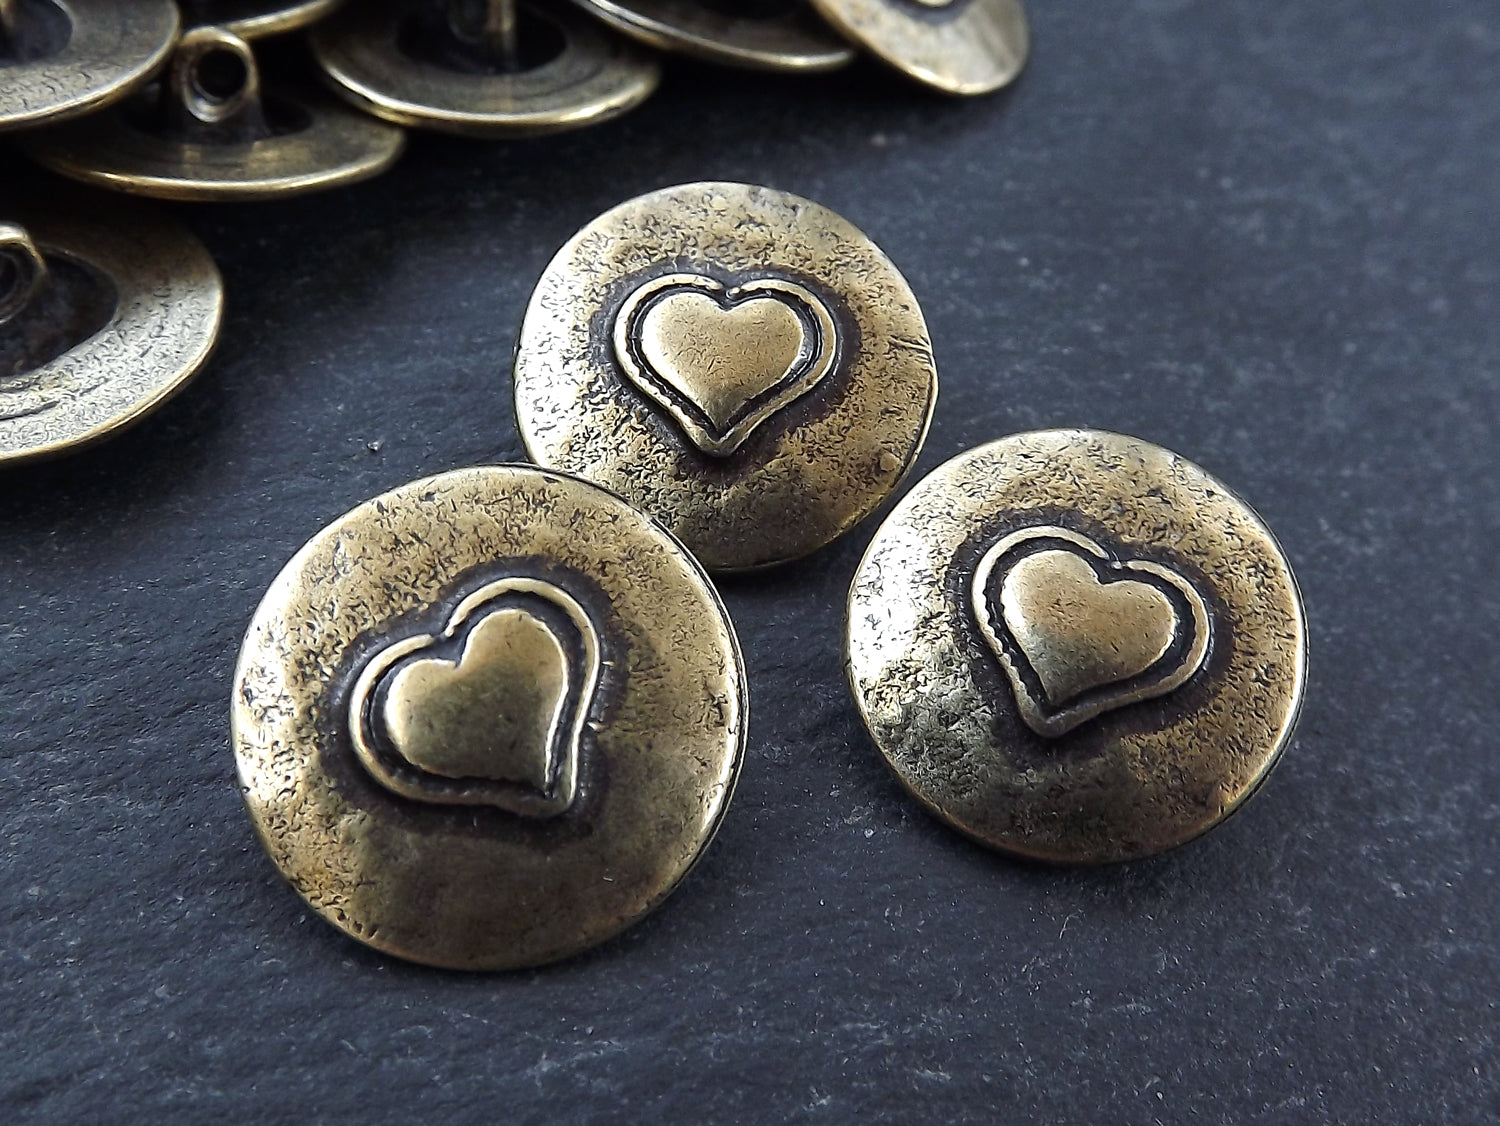 3 Rustic Metal Heart Buttons Antique Bronze Plated - Round Silver Buttons, Metal Shank Button, Sewing Buttons, Jewelry Making Buttons